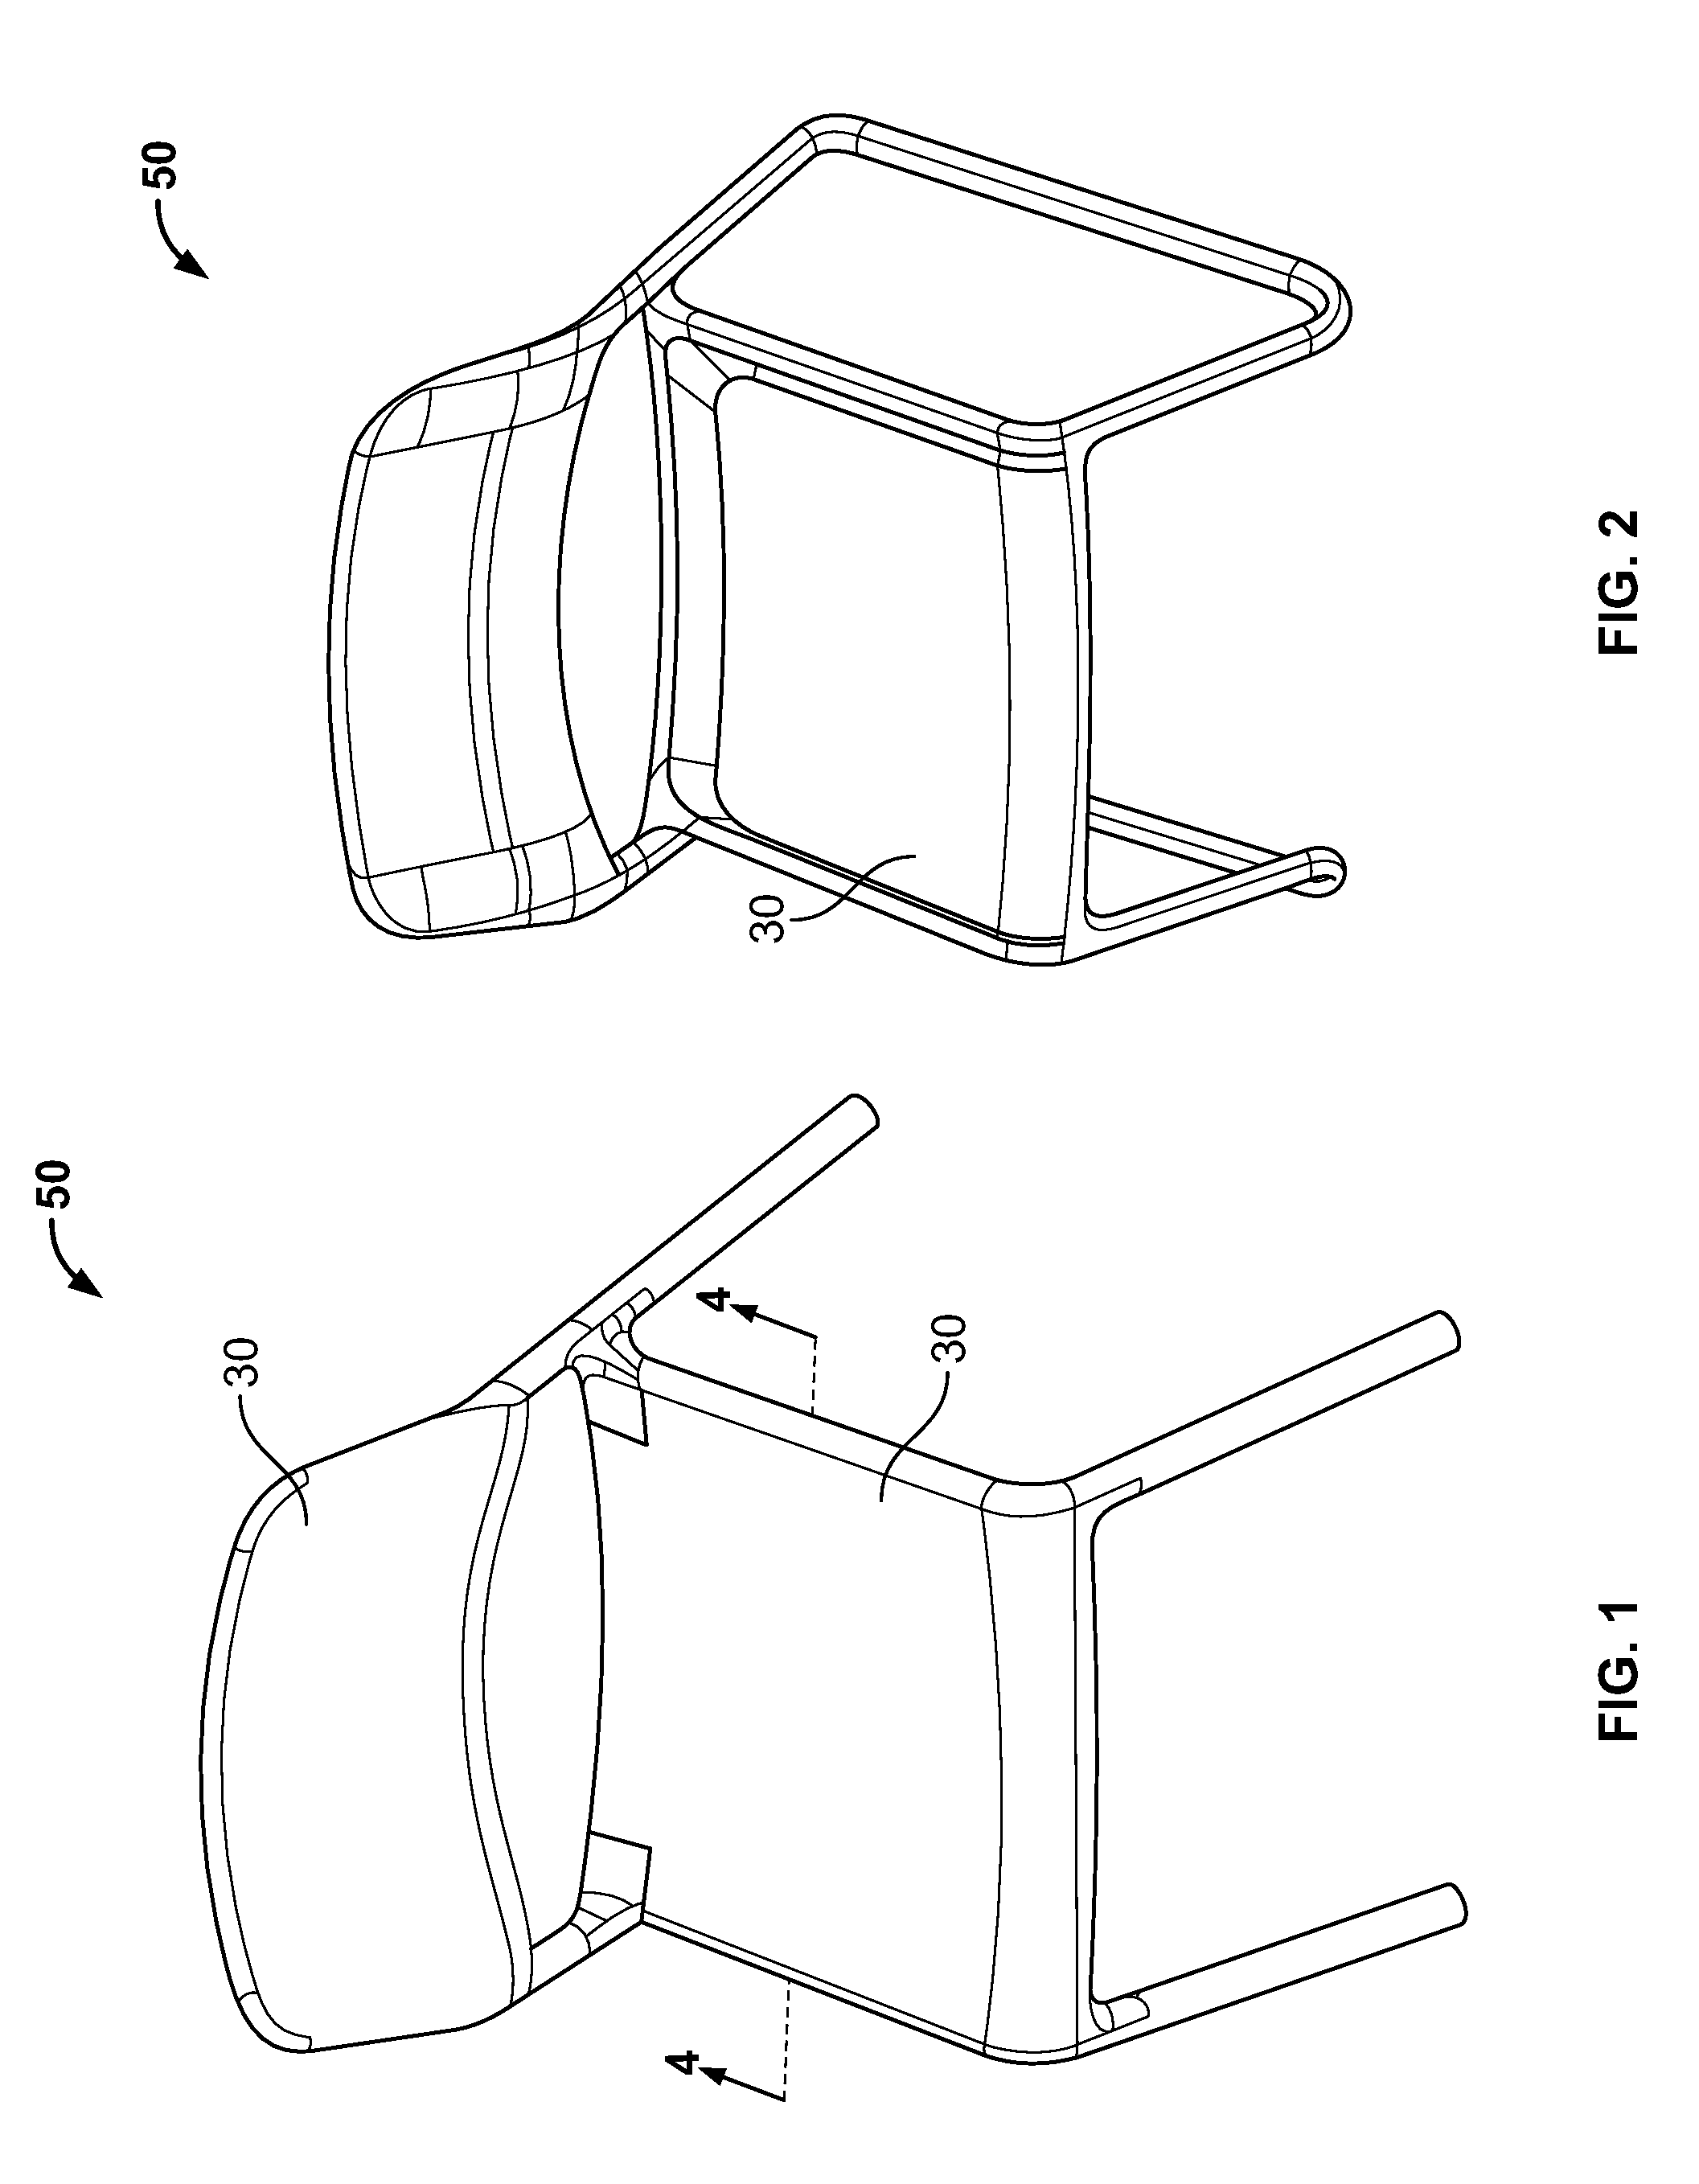 Co-injection molded chair